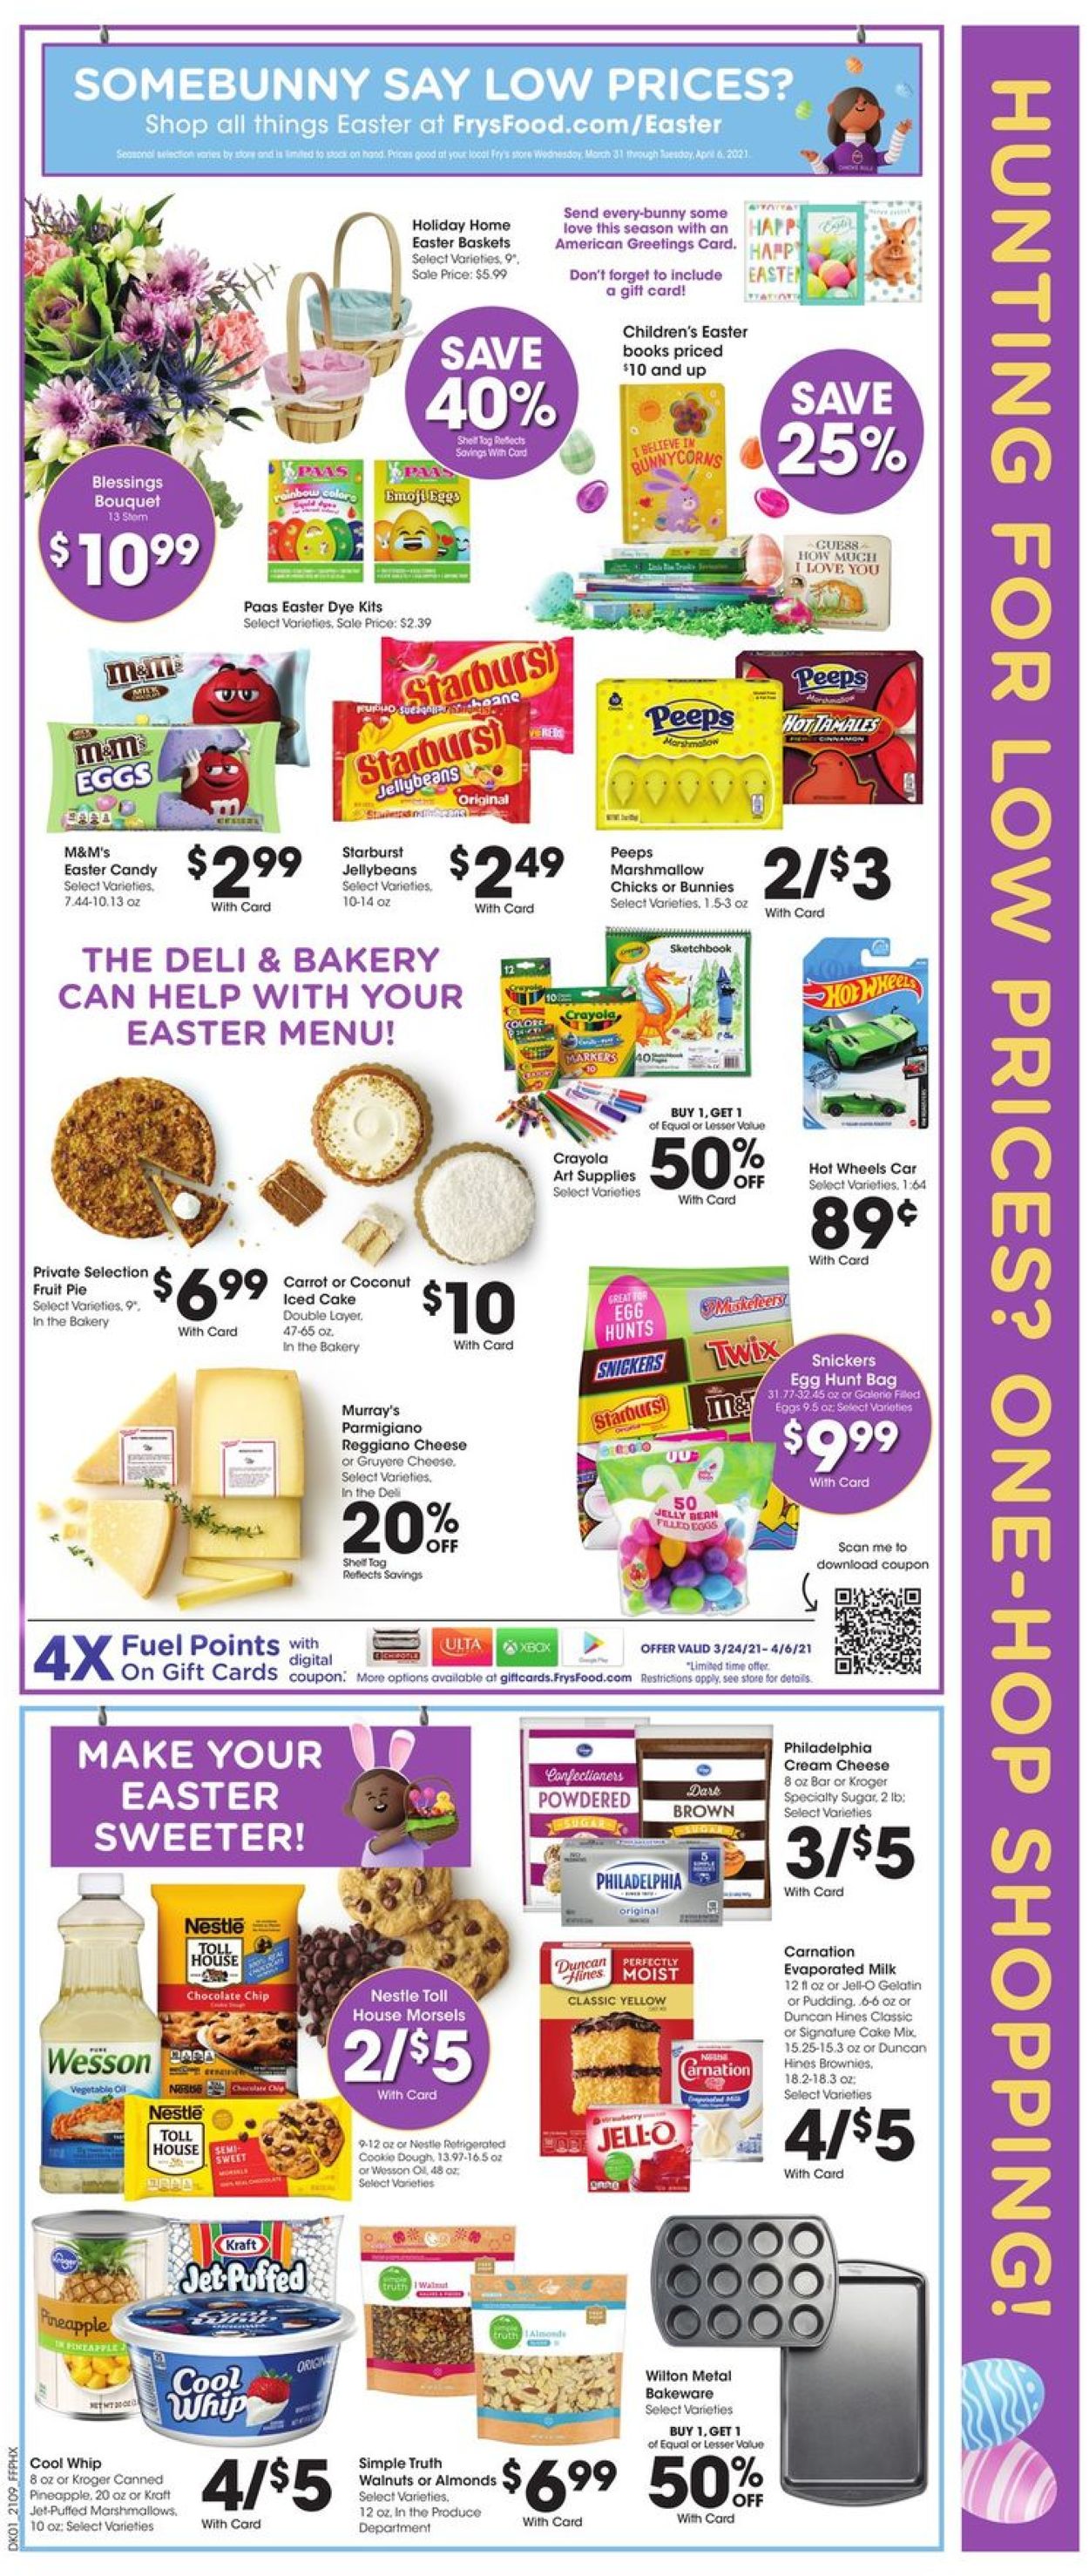 Fry’s - Easter 2021 Weekly Ad Circular - valid 03/31-04/06/2021 (Page 2)